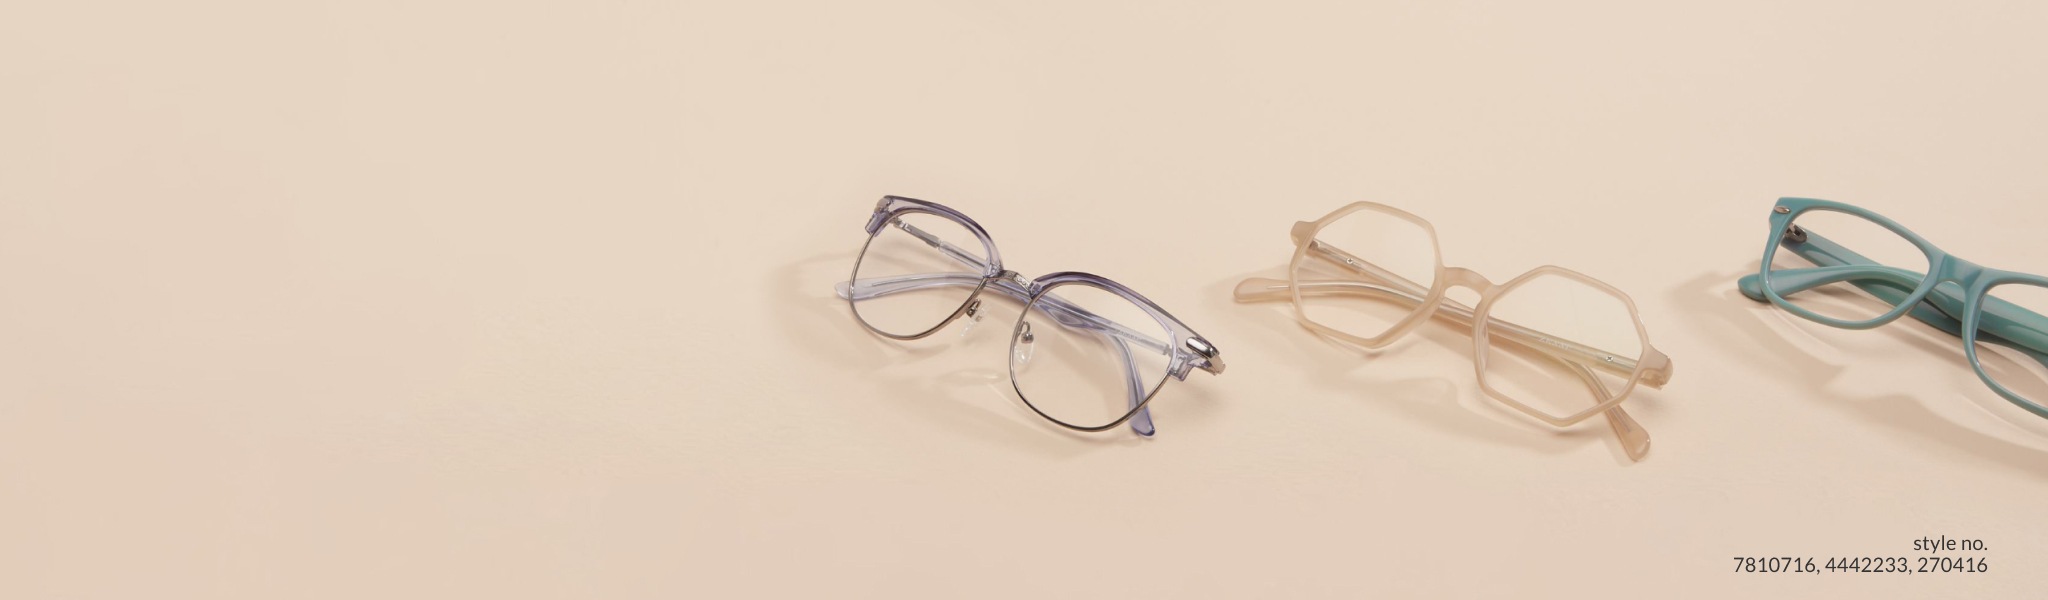 Image of three pairs of Zenni glasses against a beige-colored background.